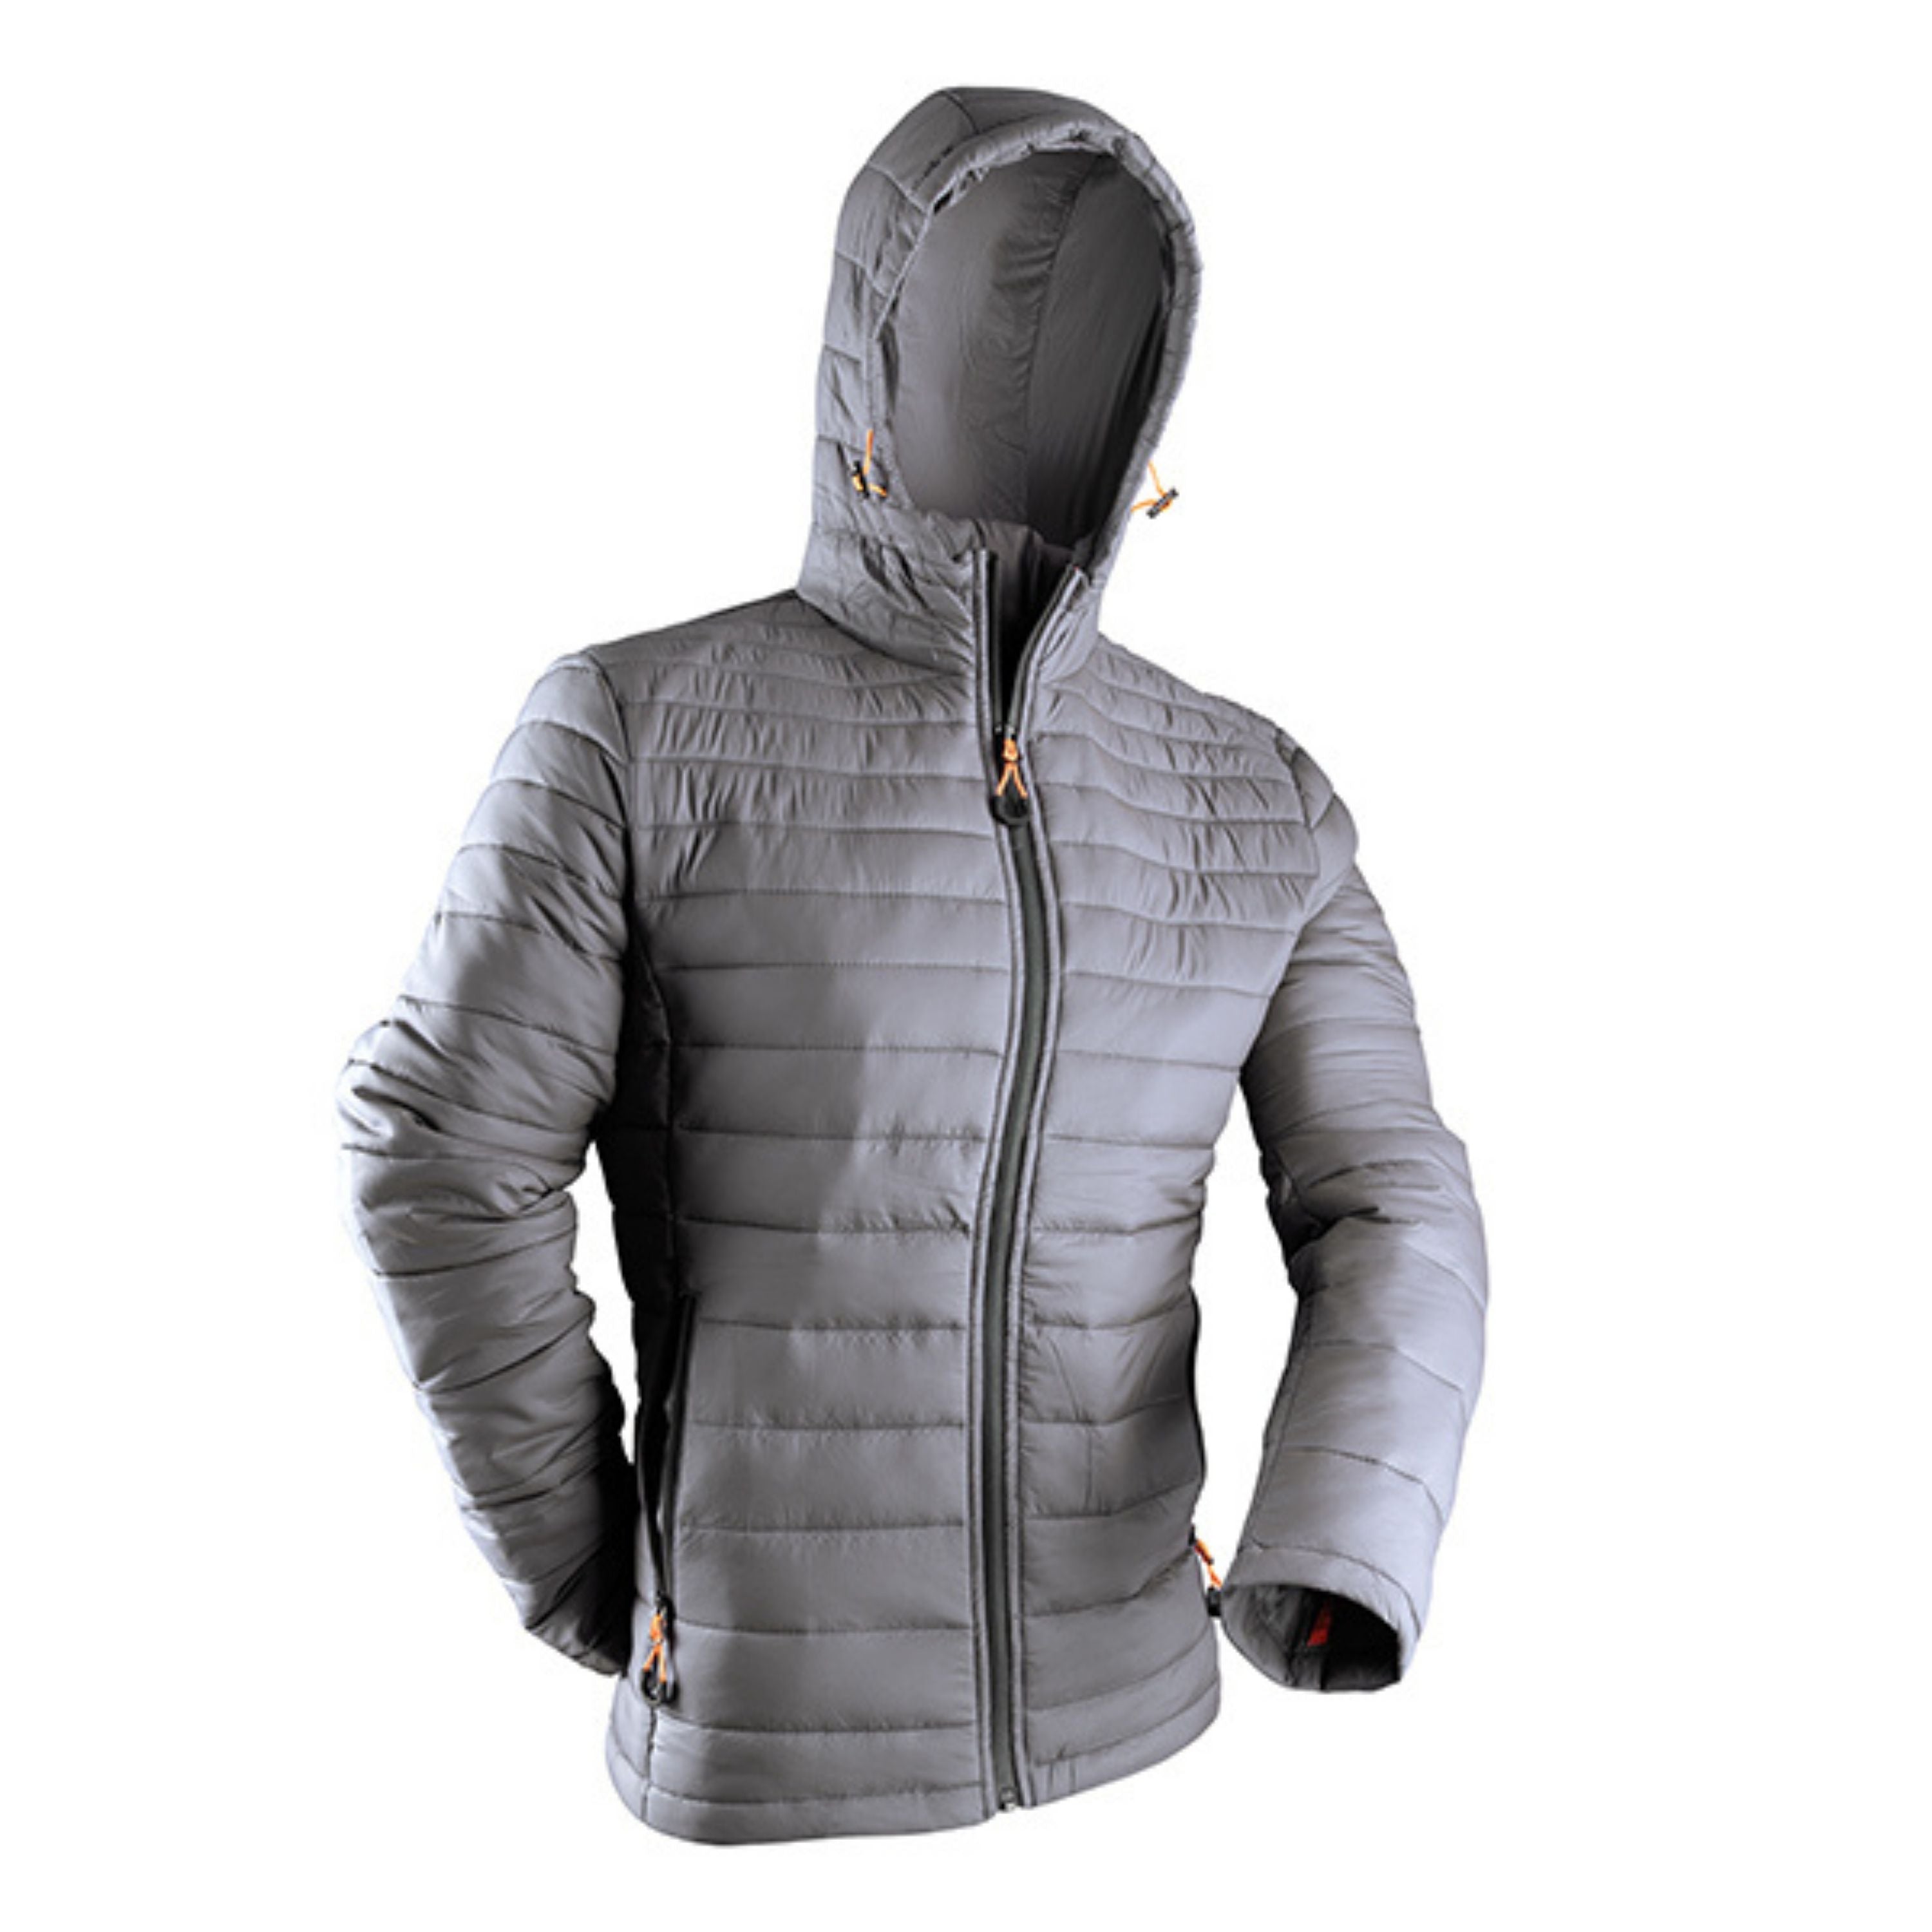 “City” Insulated jacket with hood - Men's